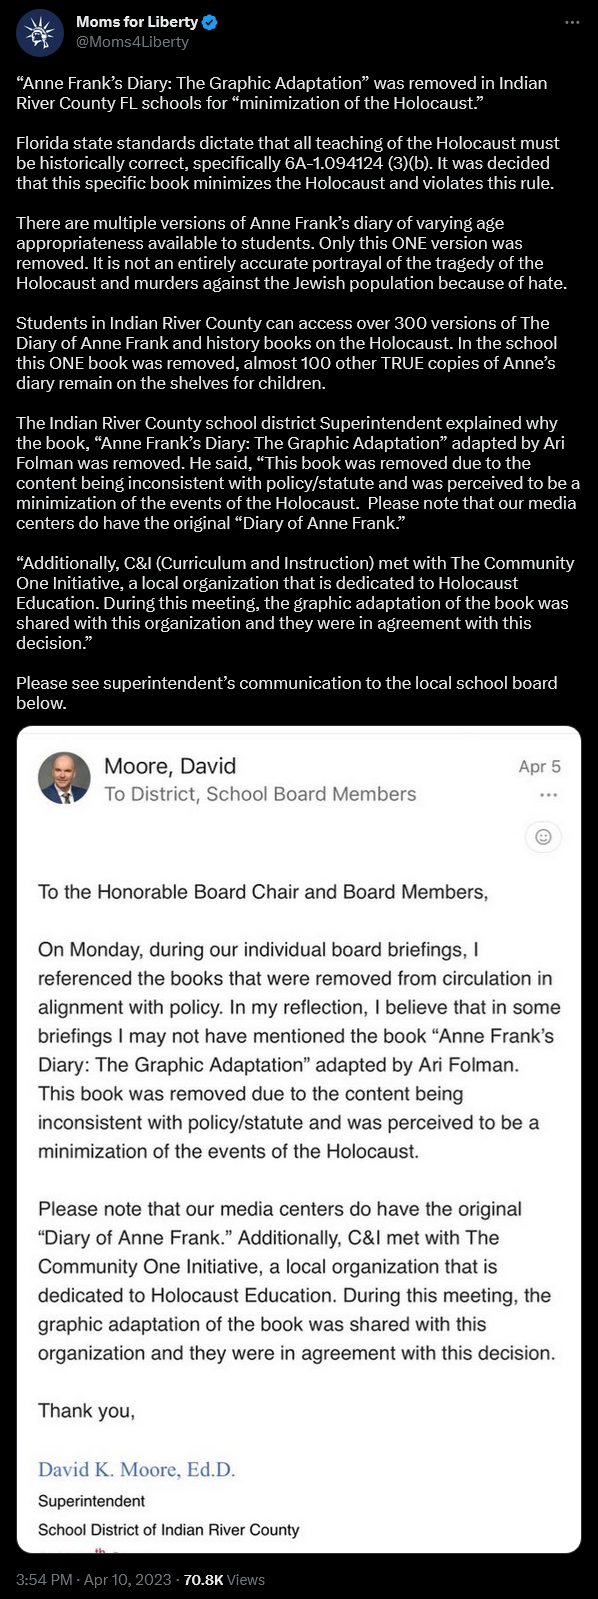 Moms for Liberty explain why 'Anne Frank's Diary: The Graphic Adaptation was removed from Indian River County, FL schools